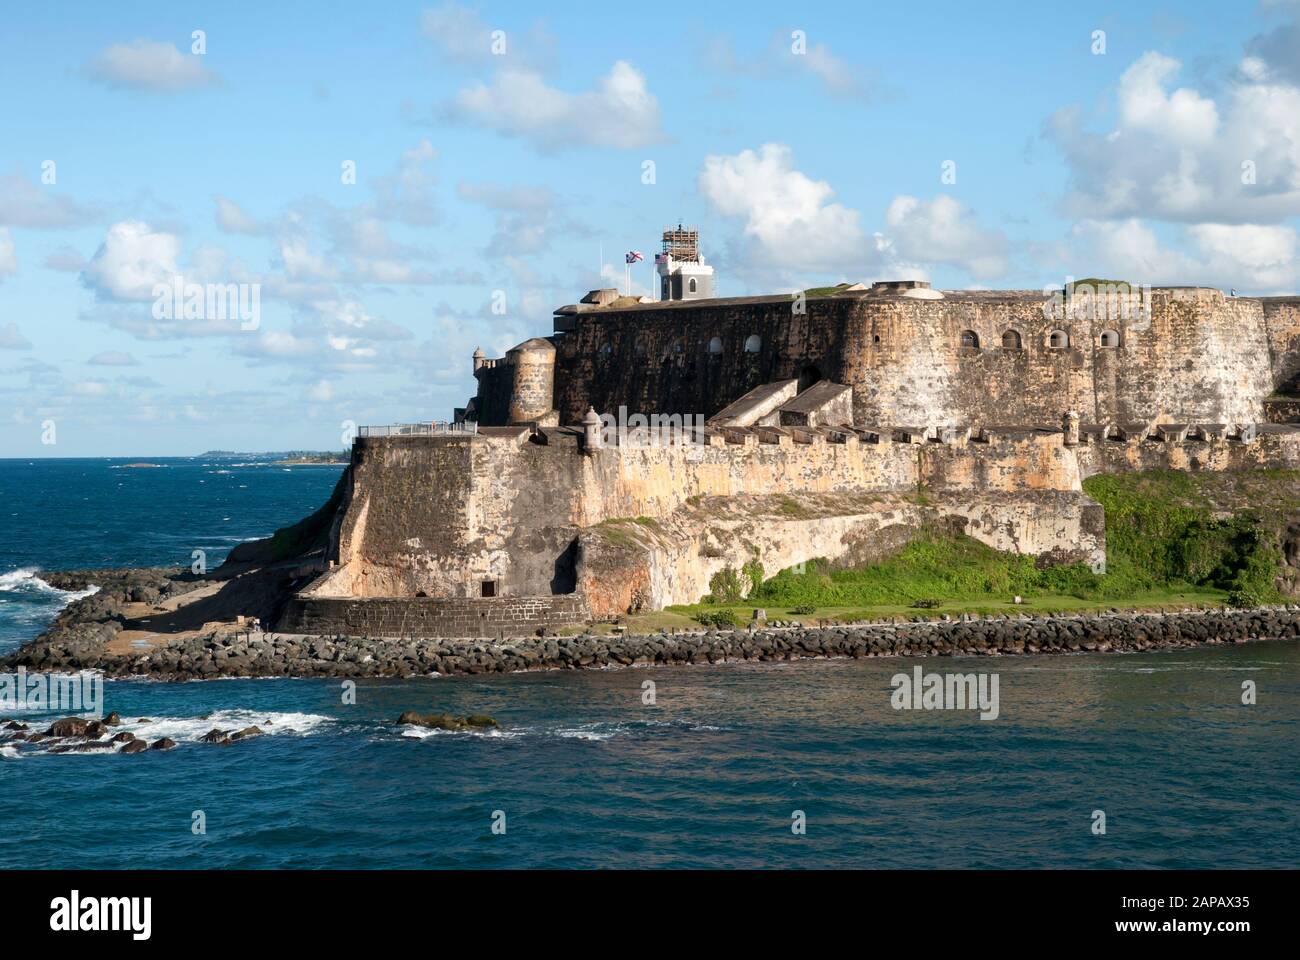 The view of 16th century Spanish fortification before entering San Juan old town bay (Puerto Rico). Stock Photo